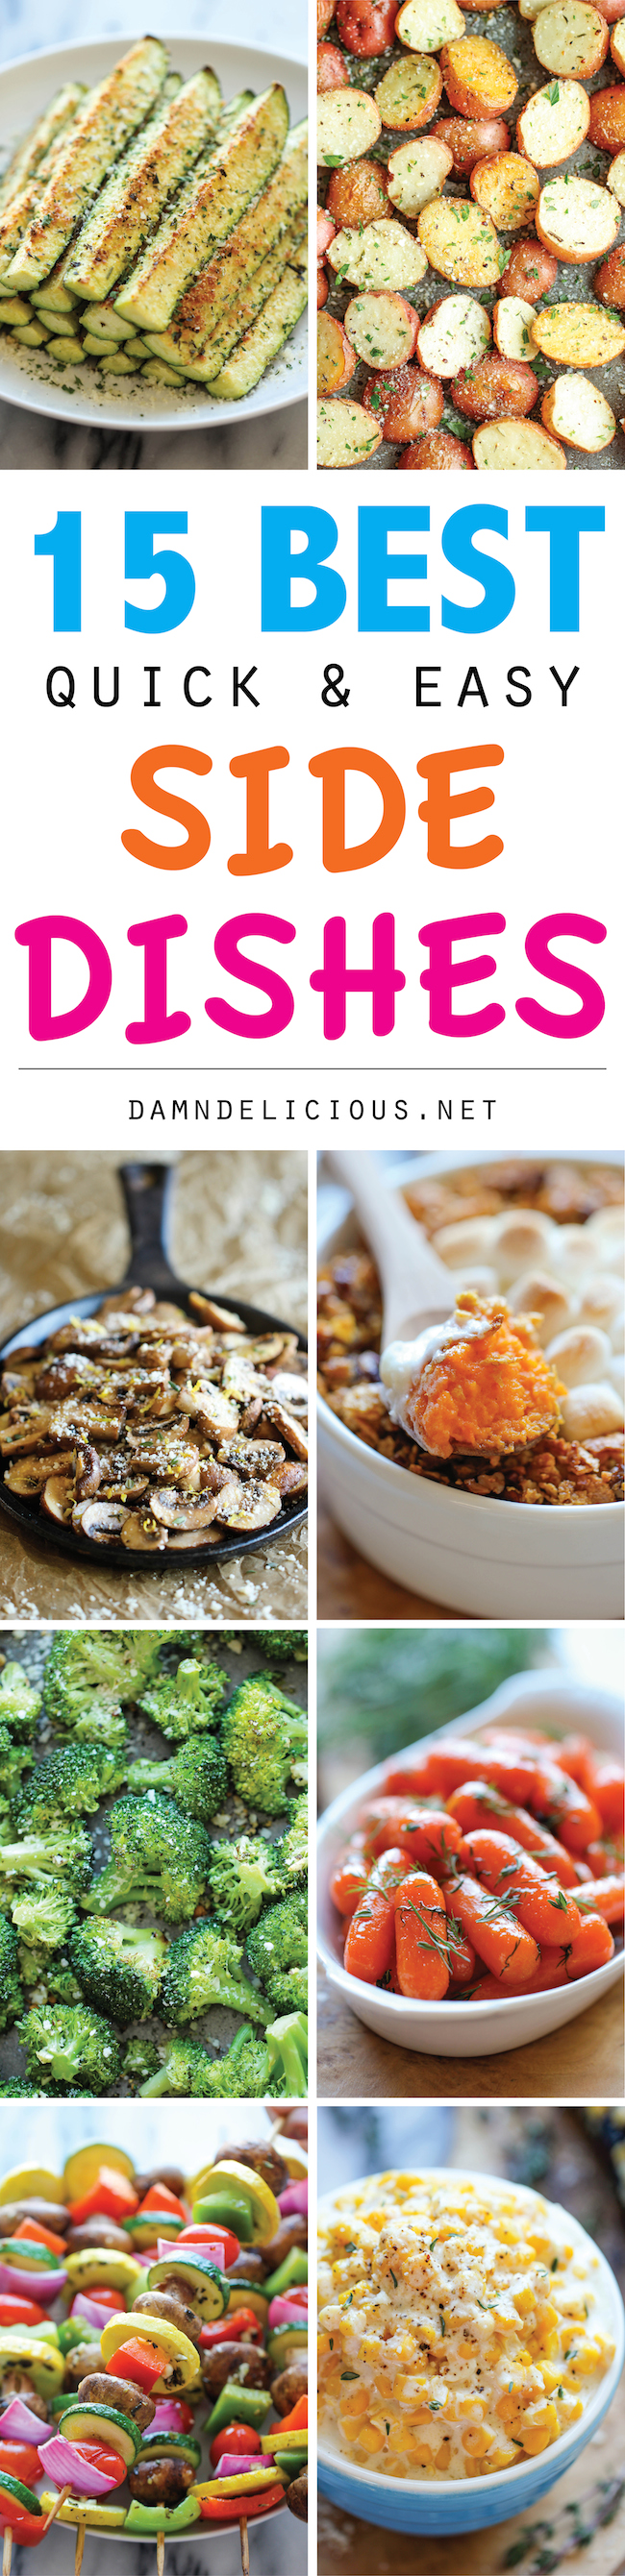 15 Best Quick and Easy Side Dishes - Save time and energy with these easy, simple side dishes that complete any meal!